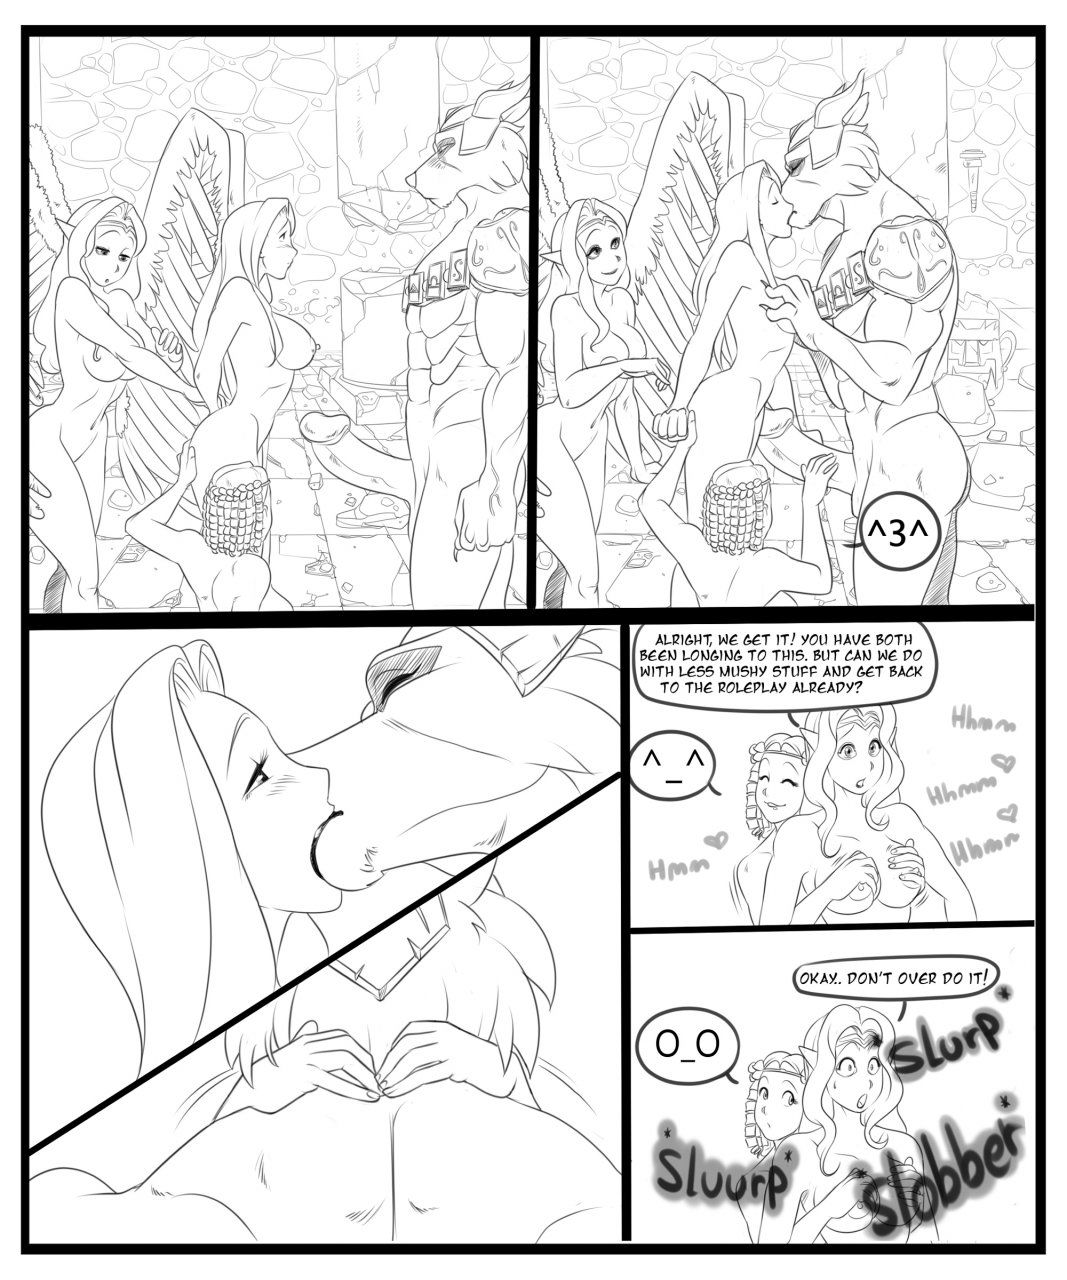 Grillo- To Please a God page 1